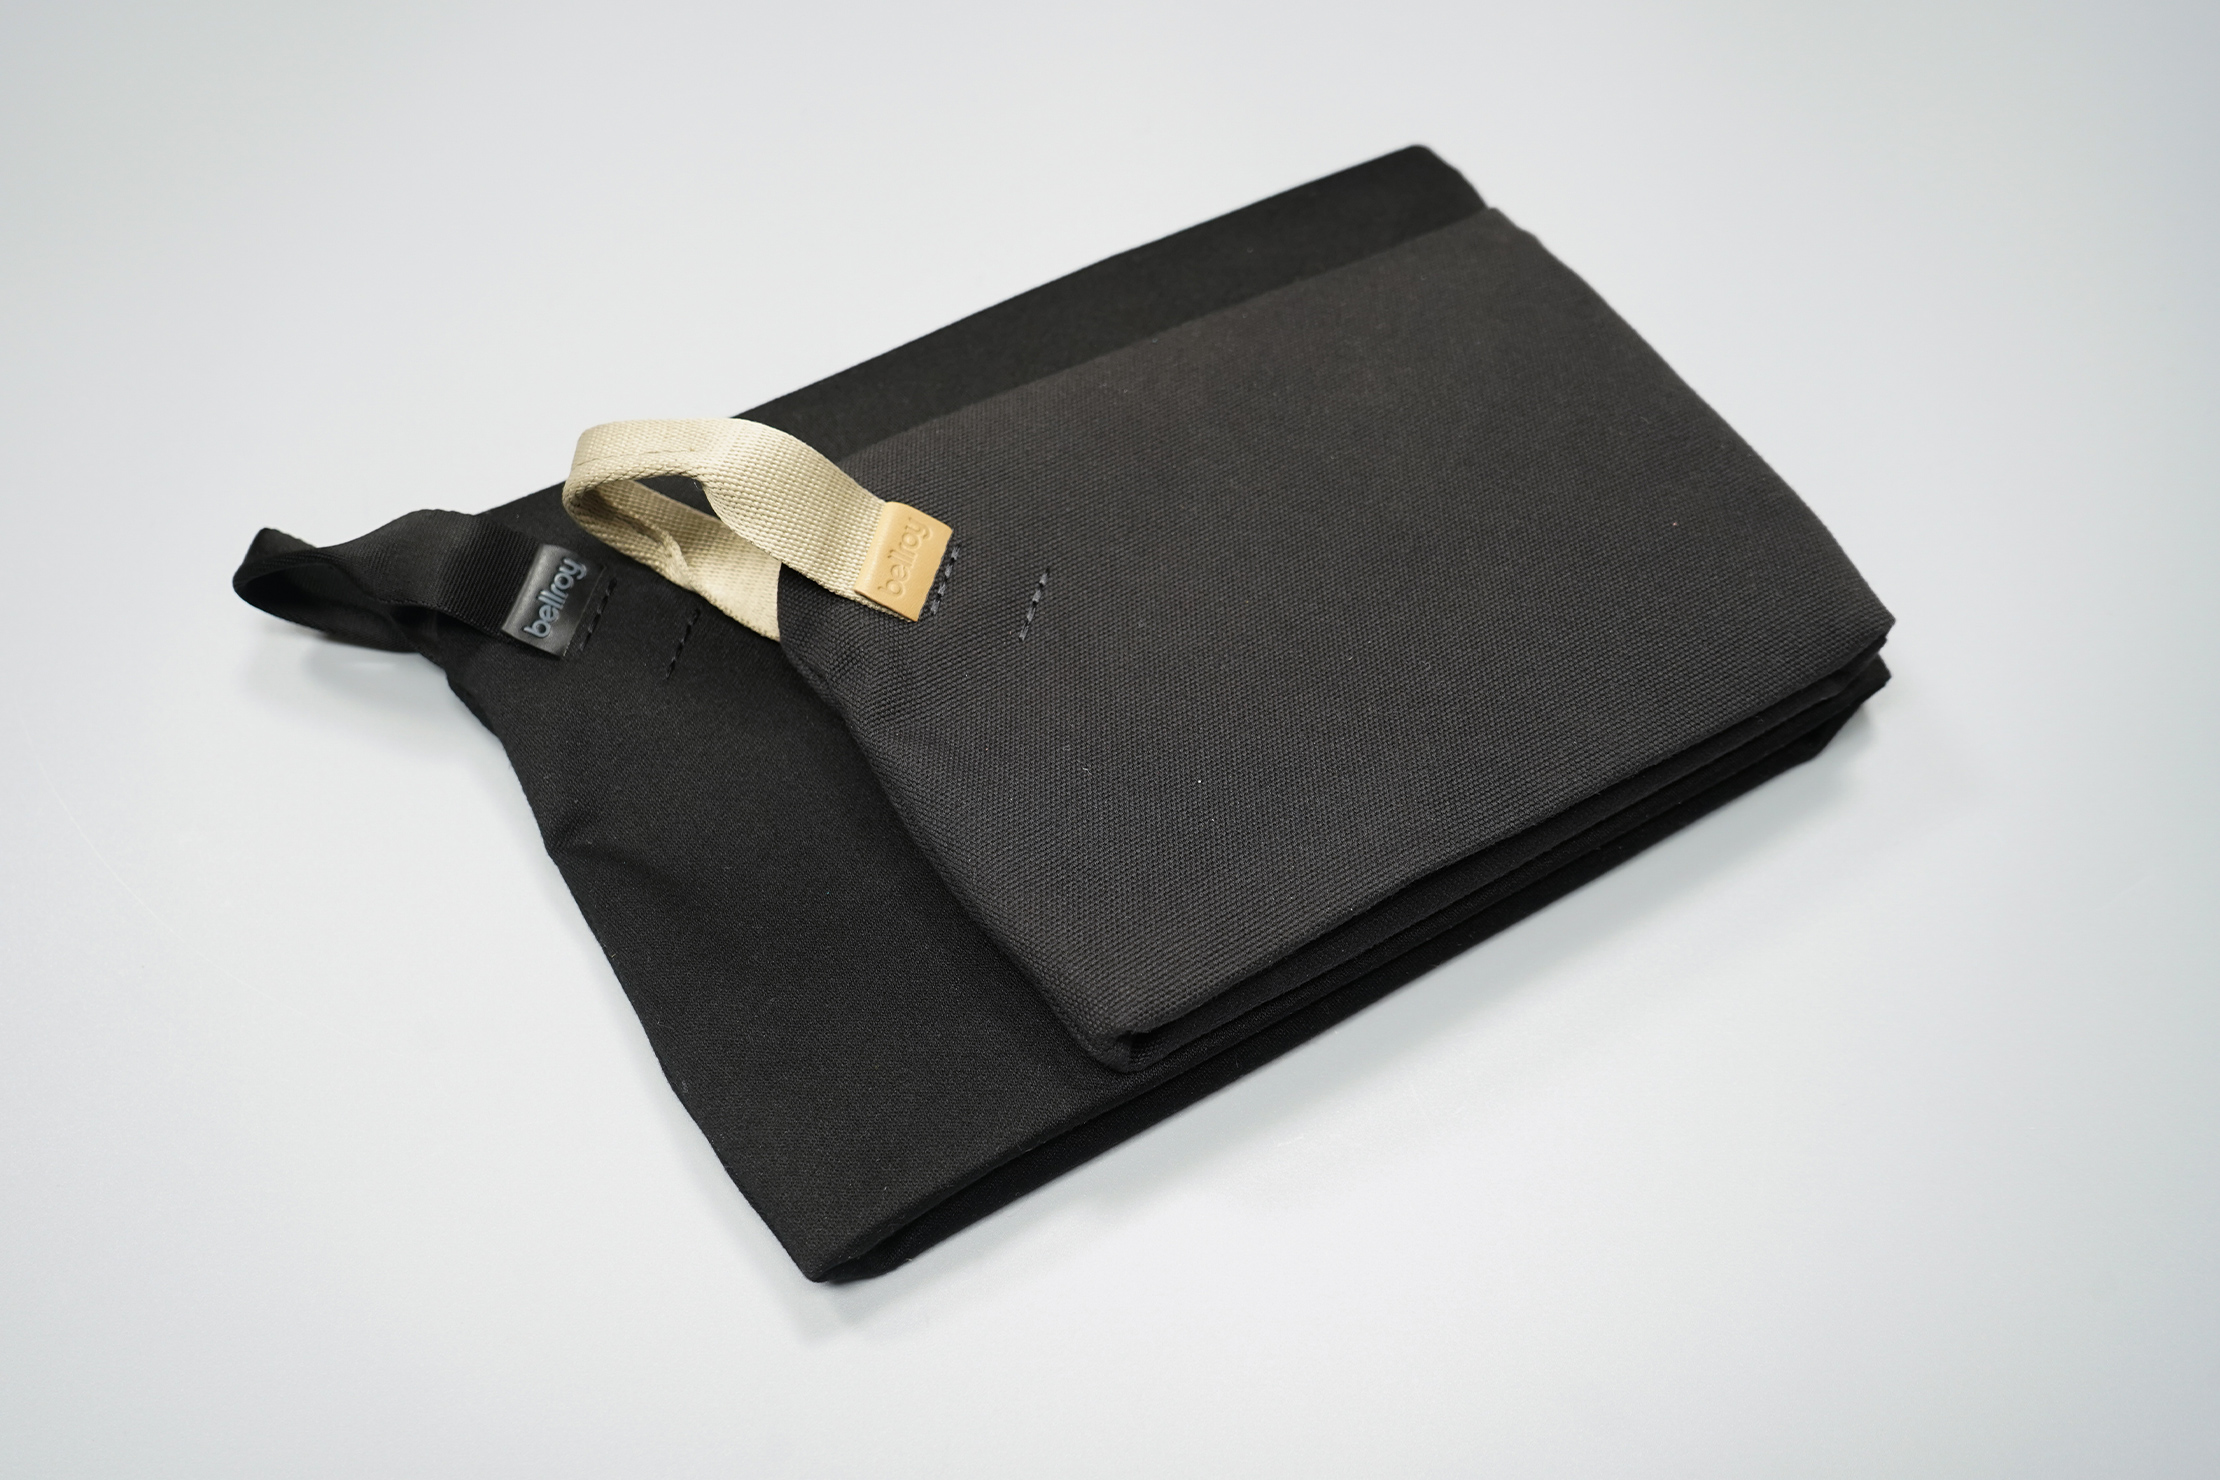 Bellroy Standing Pouch | There's also a plus-sized variant